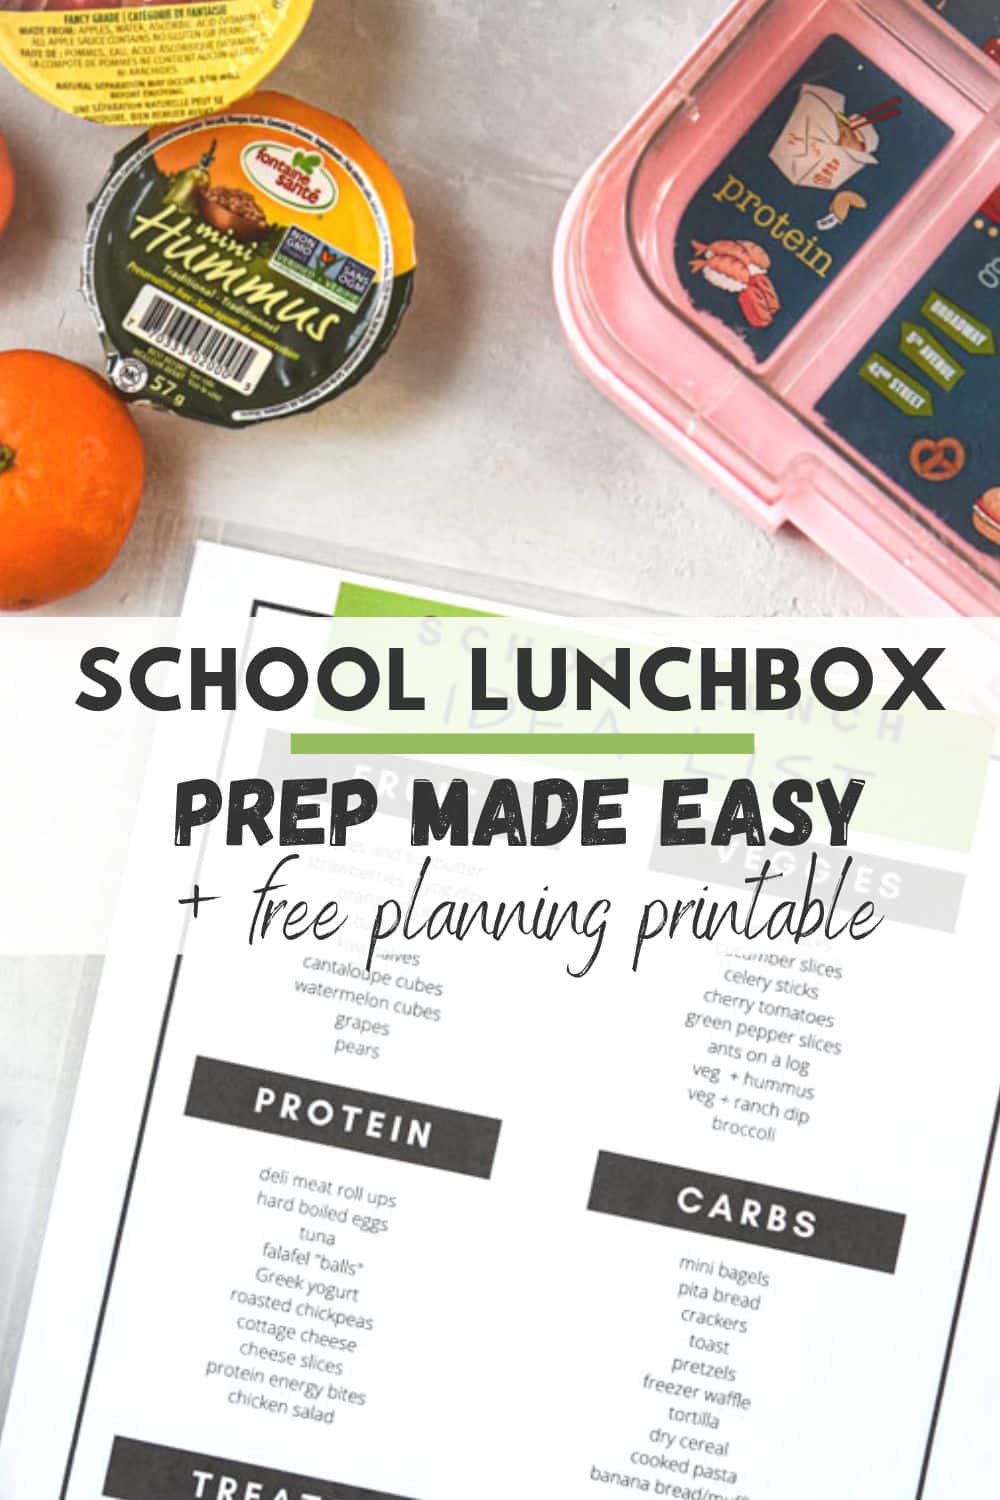 How to make school lunch prep EASY! (+ free printable planning template)